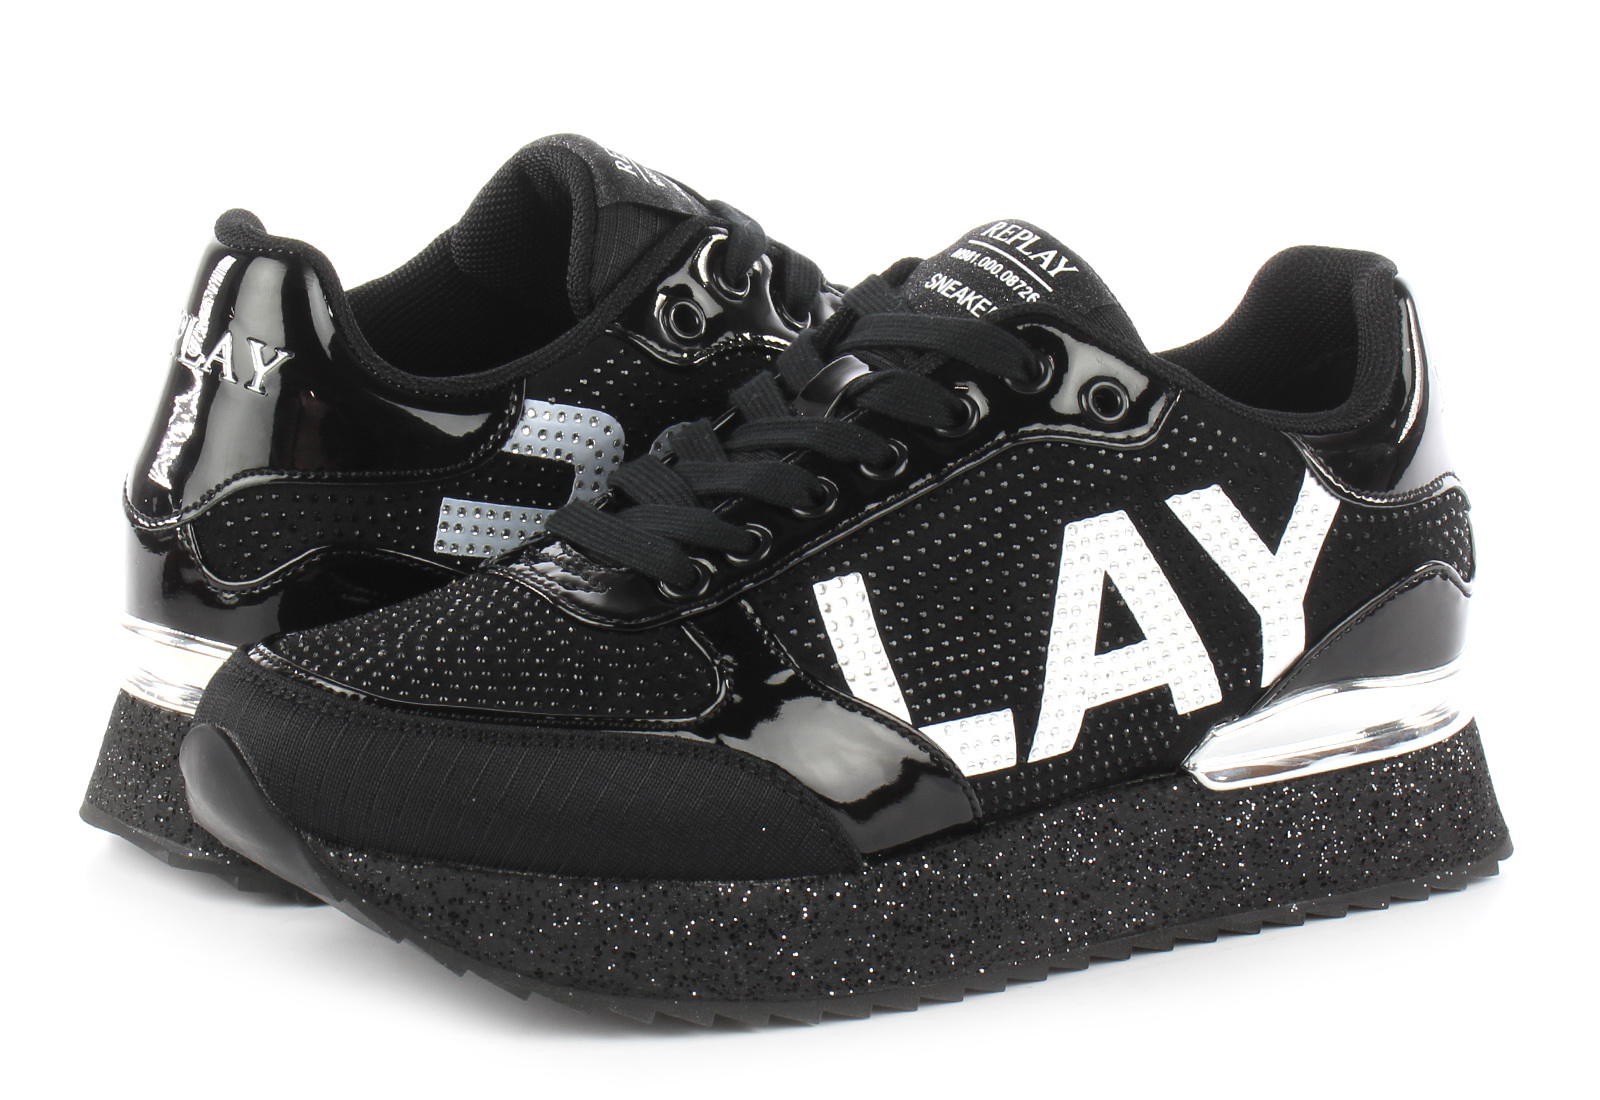 Replay Rs6e0103t Trainers in Black